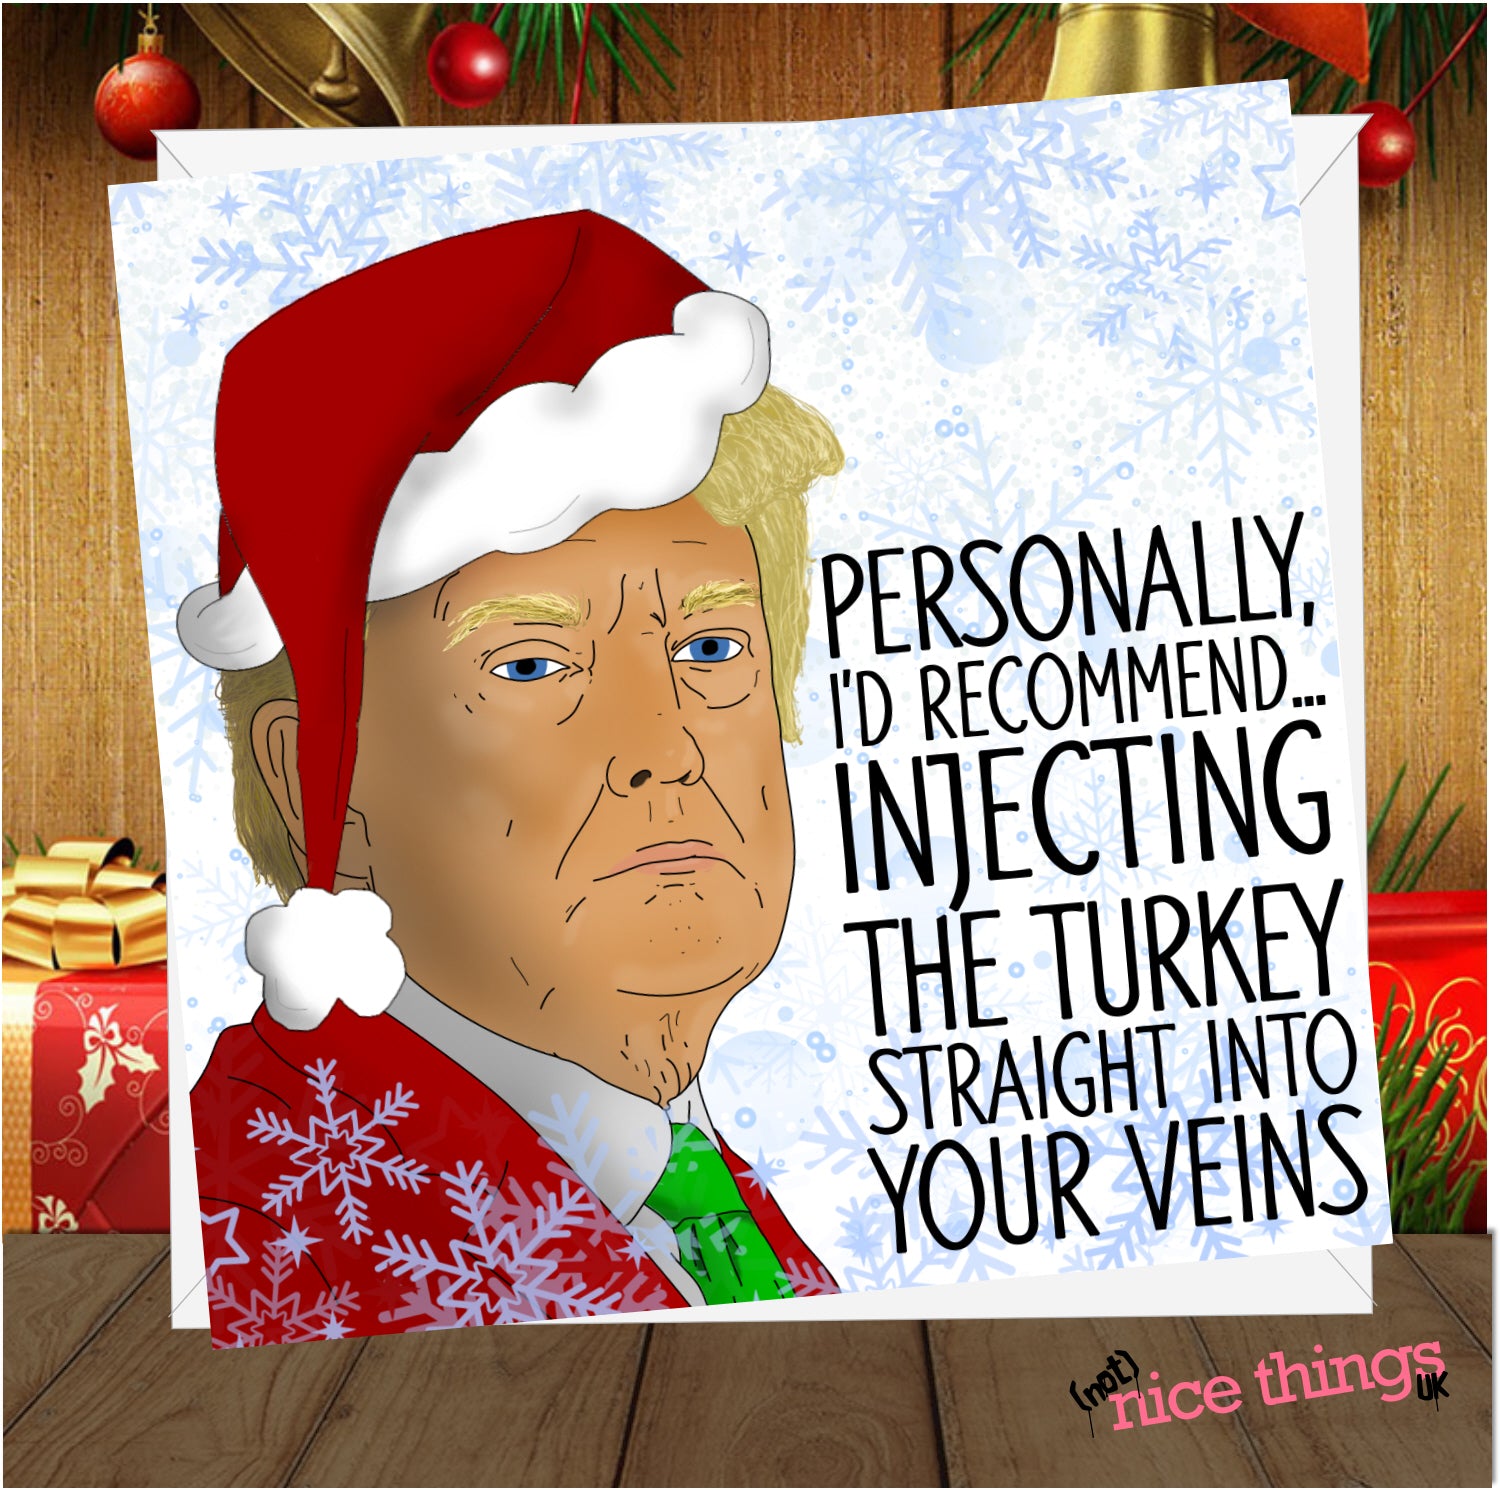 Inject Turkey Funny Christmas Card, Donald Trump Christmas Cards, Virus cards for Him, Her, Dad, Mum, Lockdown Christmas 2020